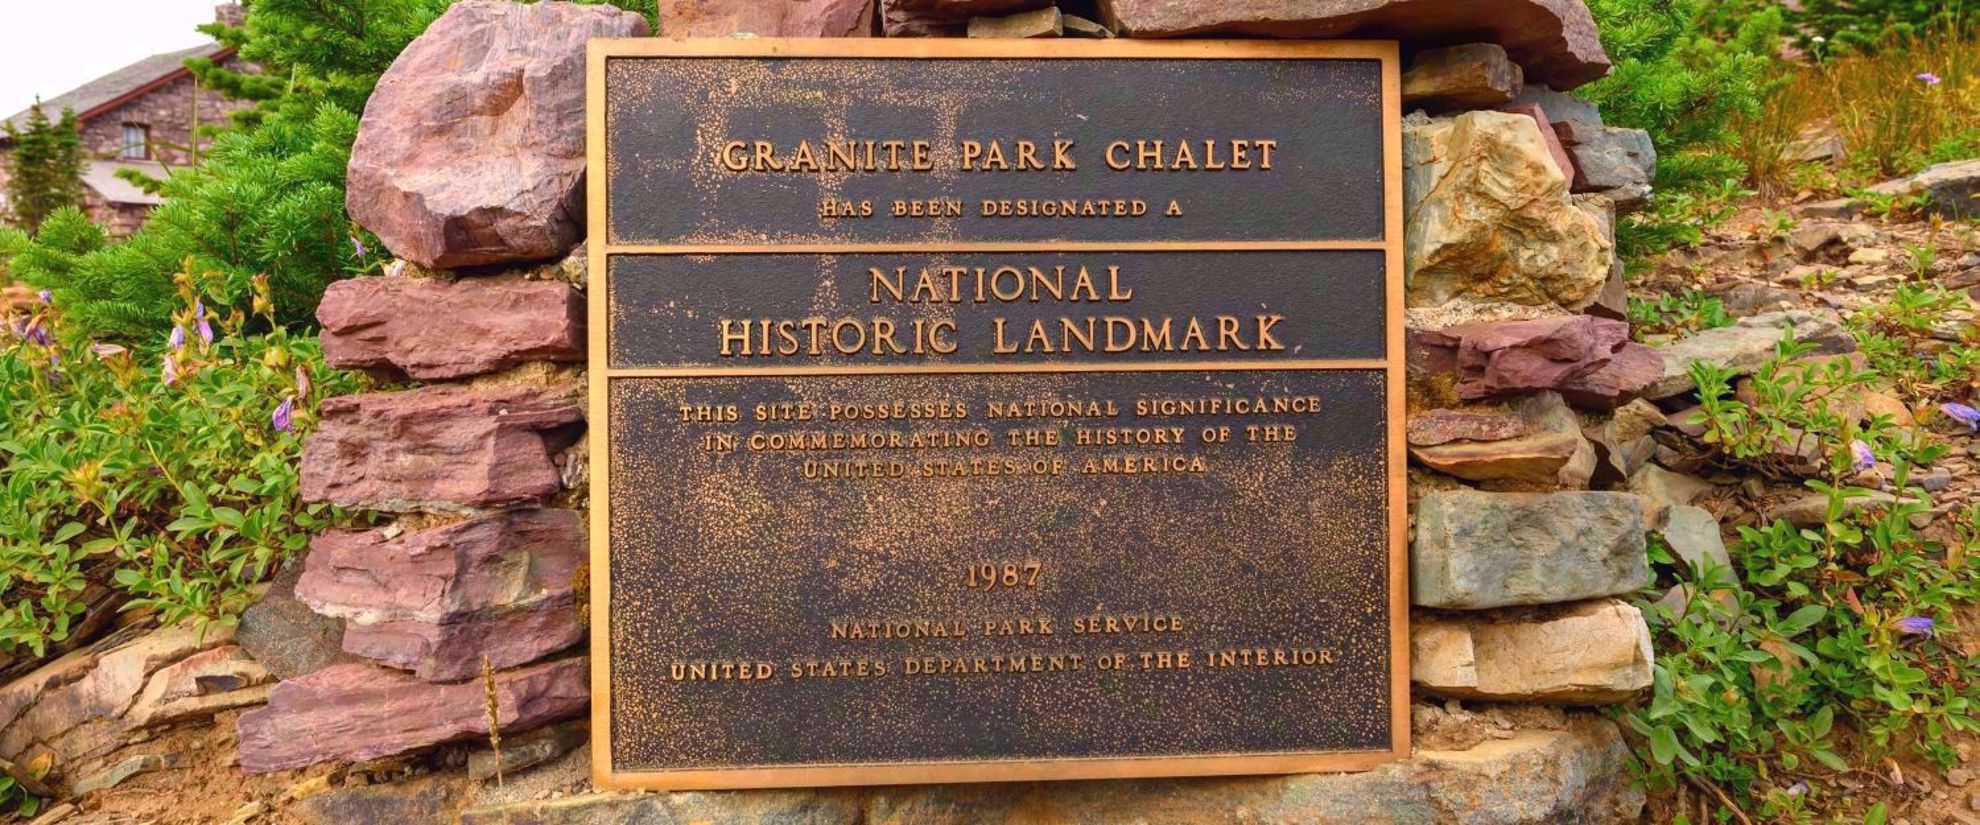 Stay in a historic Chalet in Glacier National Park